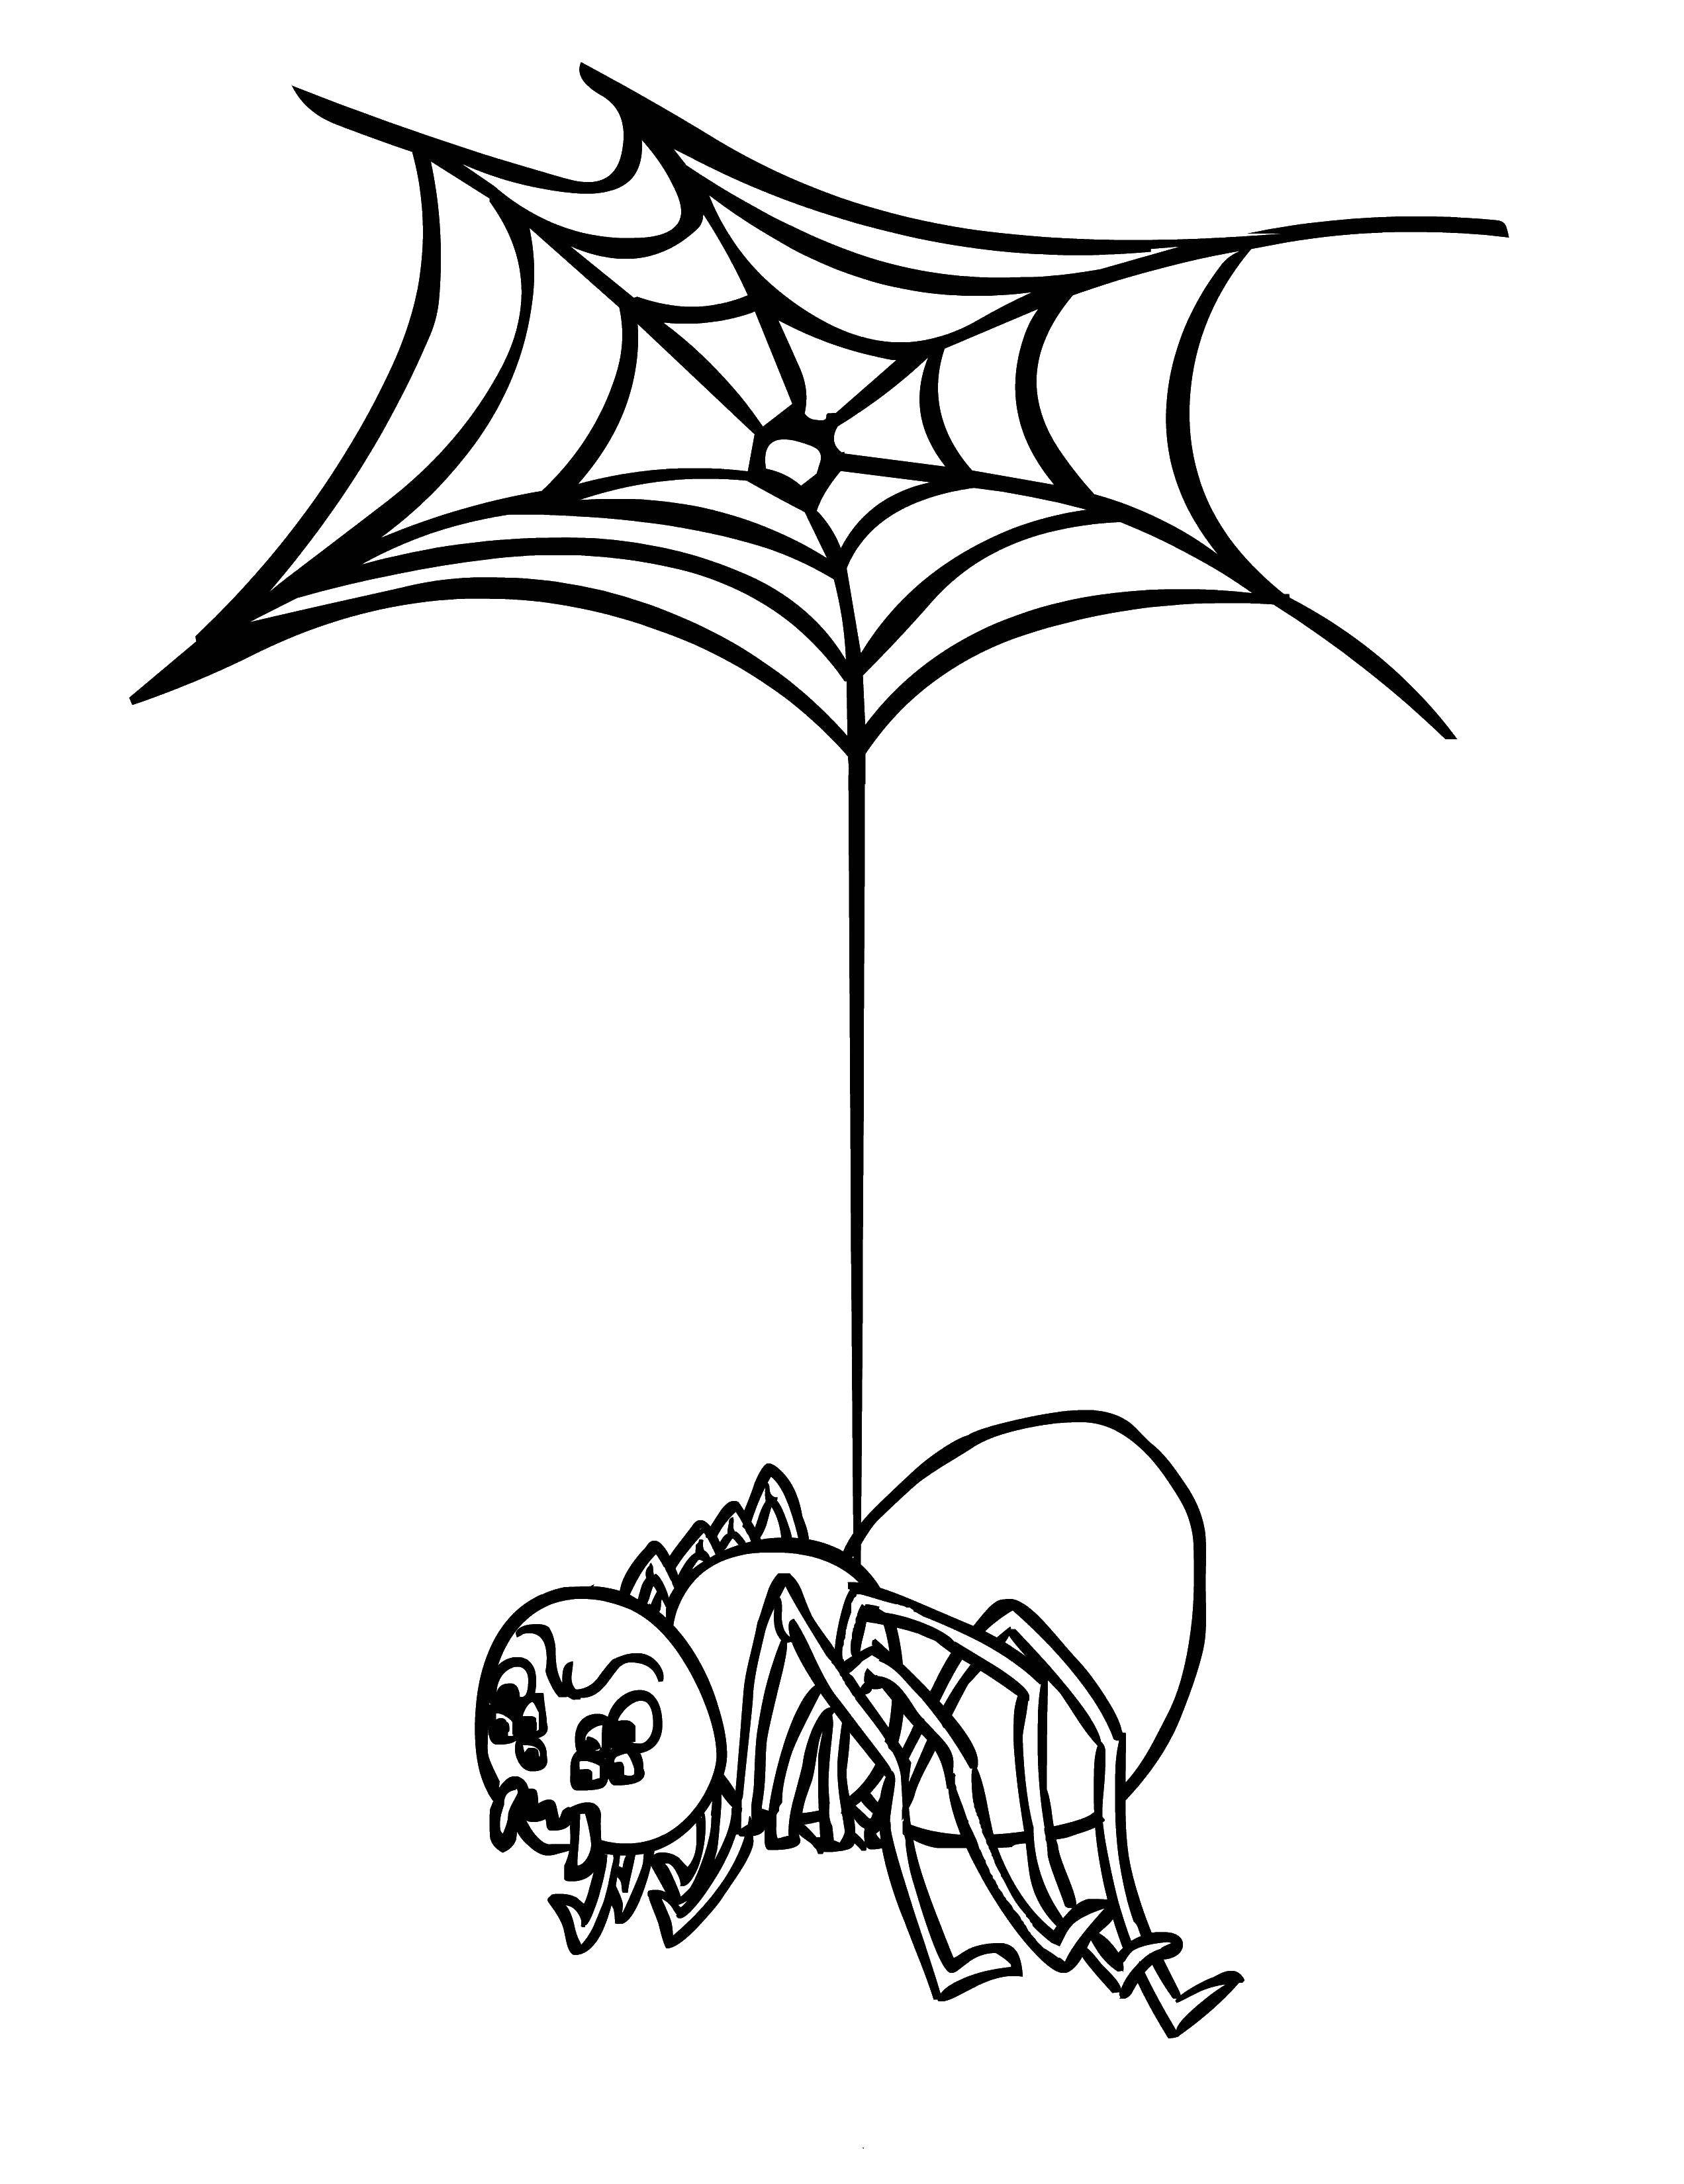 Coloring Spider on the web. Category spiders. Tags:  spider, web.